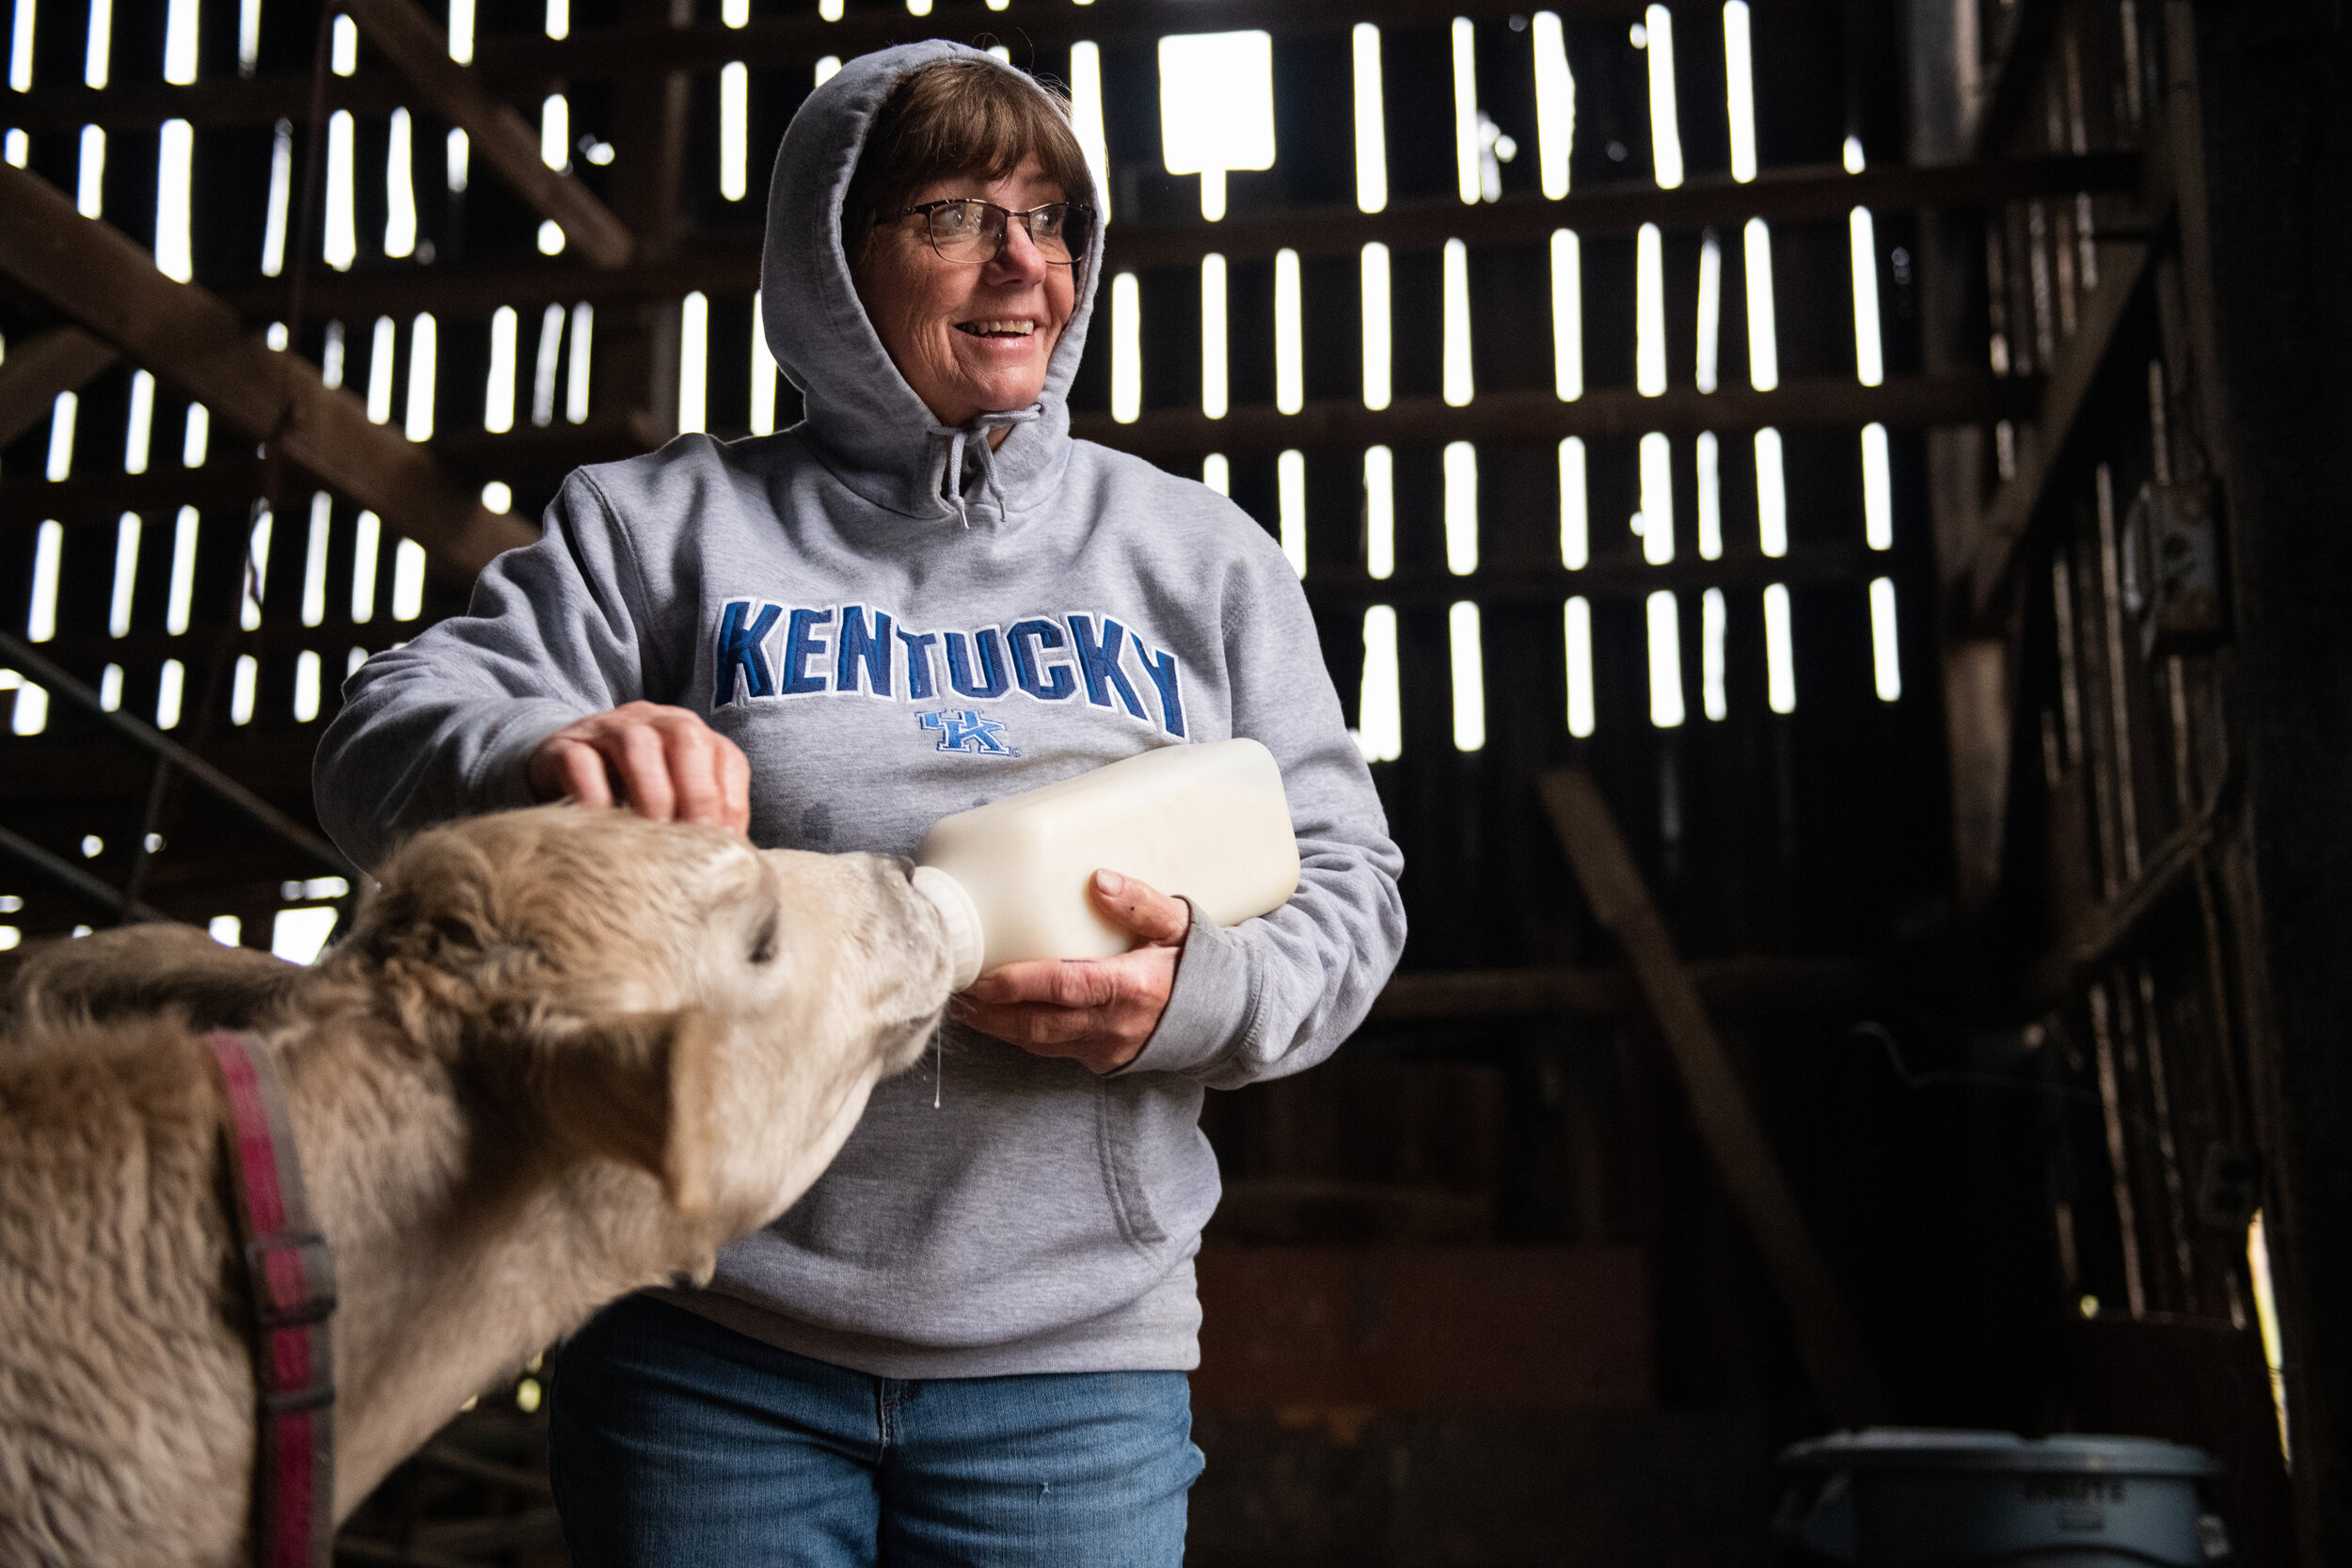   Judy Northcutt, a resident of Cynthiana, Ky., bottle feeds her calf, Junebug, at her family's barn in Cynthiana on October 31, 2019.  